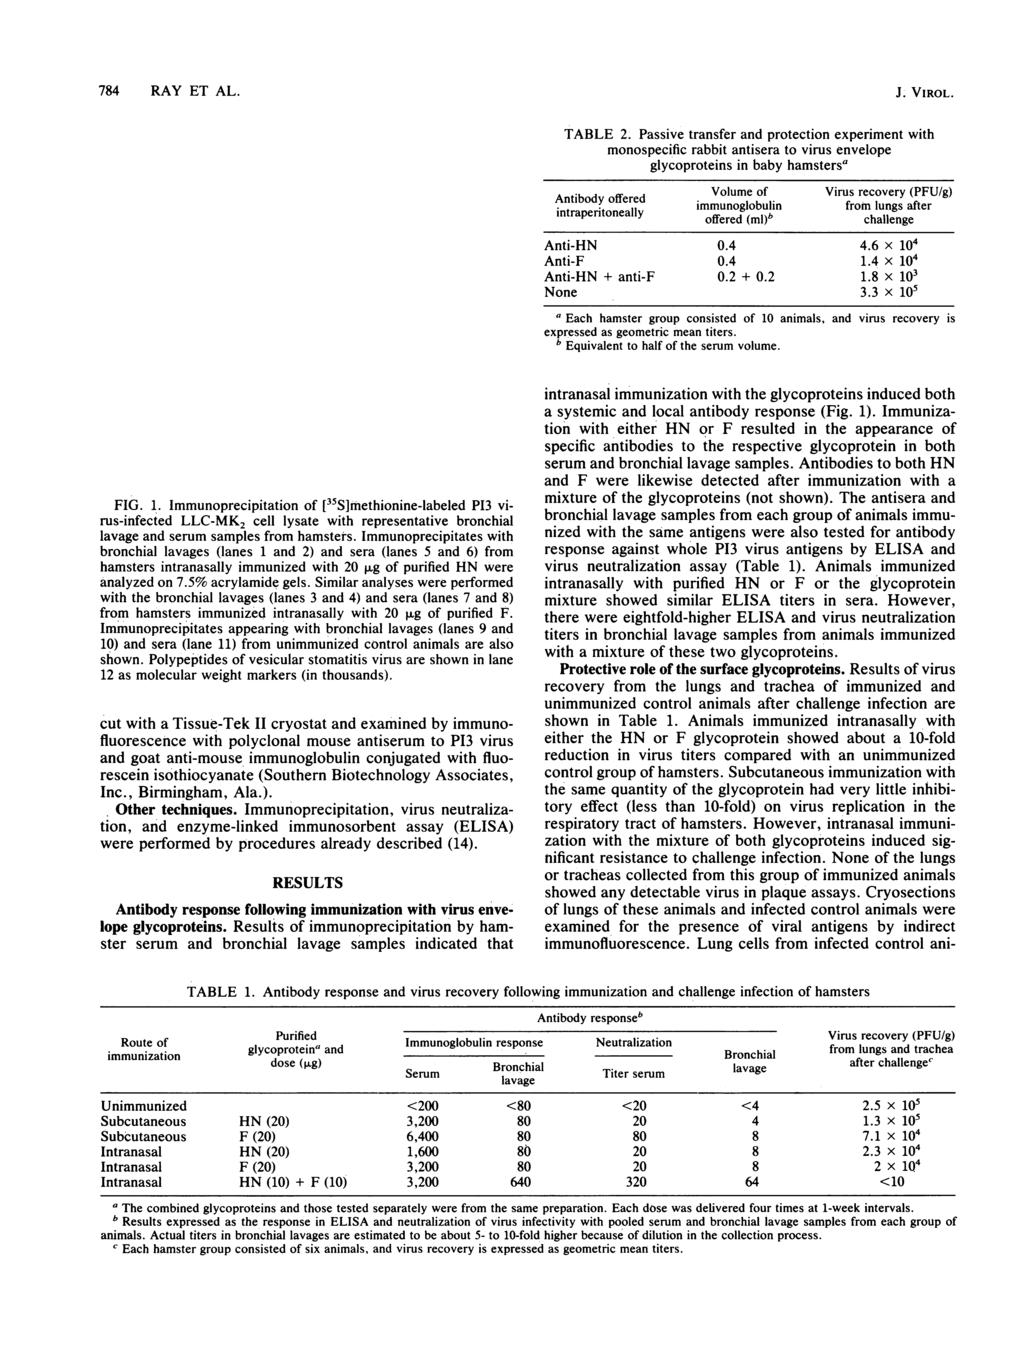 784 RAY ET AL. HN F 1 2 3 4 5 6 7 8 9 10 11 12.; W w VW 65 50 FIG. 1. Immunoprecipitation of [35S]methionine-labeled P13 virus-infected LLC-MK2 cell lysate with representative bronchial lavage and serum samples from hamsters.